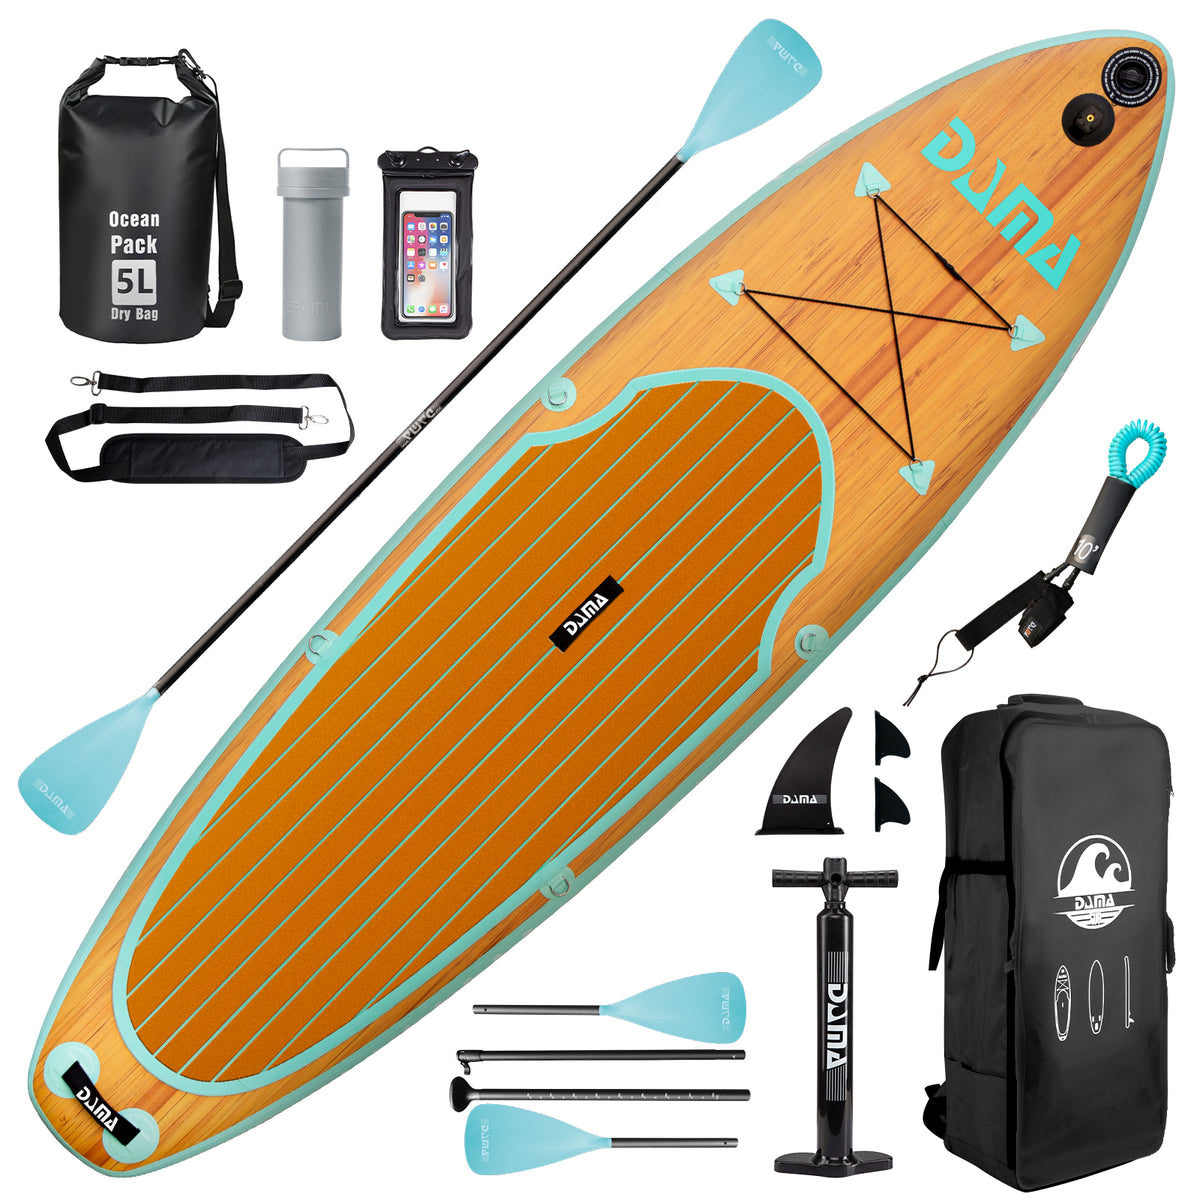 DAMA 9'6"/10'6"/11' Stand Up Paddle Board, Yoga Board, Camera Seat, Floating Paddle, Pump, Board Carrier, Waterproof Bag, Drop Stitch, Traveling Board